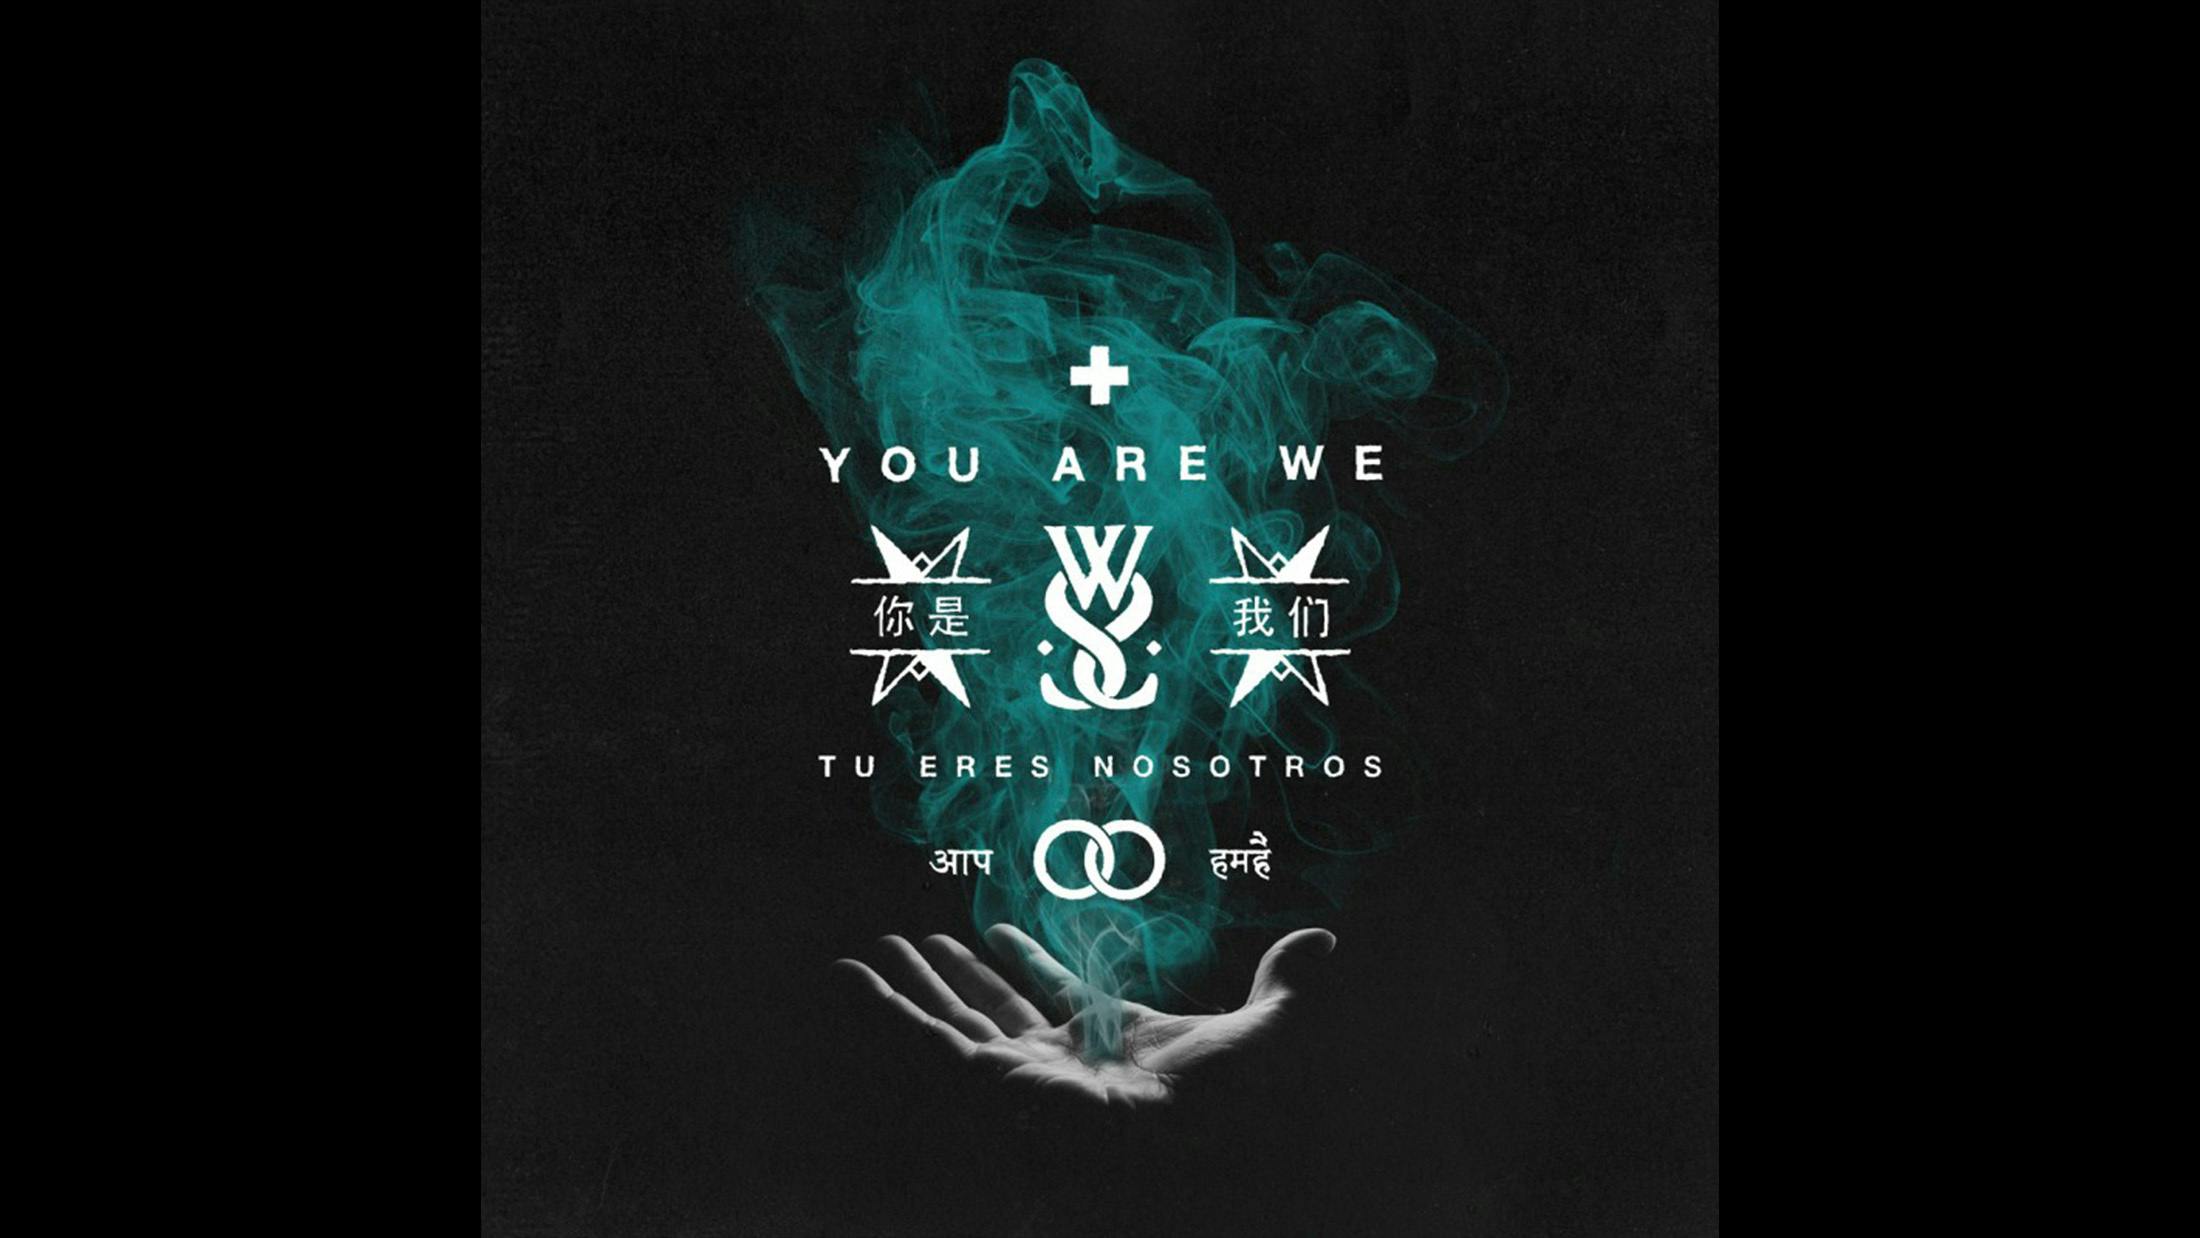 "WSS are carrying the flag for modern metal and metalcore alike. Over the years, WSS had been developing a sound entirely their own, and with  their latest effort, Sleeps has delivered one of the records of the year. WSS is one of our favourite bands in Trivium - and to know that at one point Trivium inspired Sleeps - is really heart-warming to see that cycle of inspiration flowing in modern music."